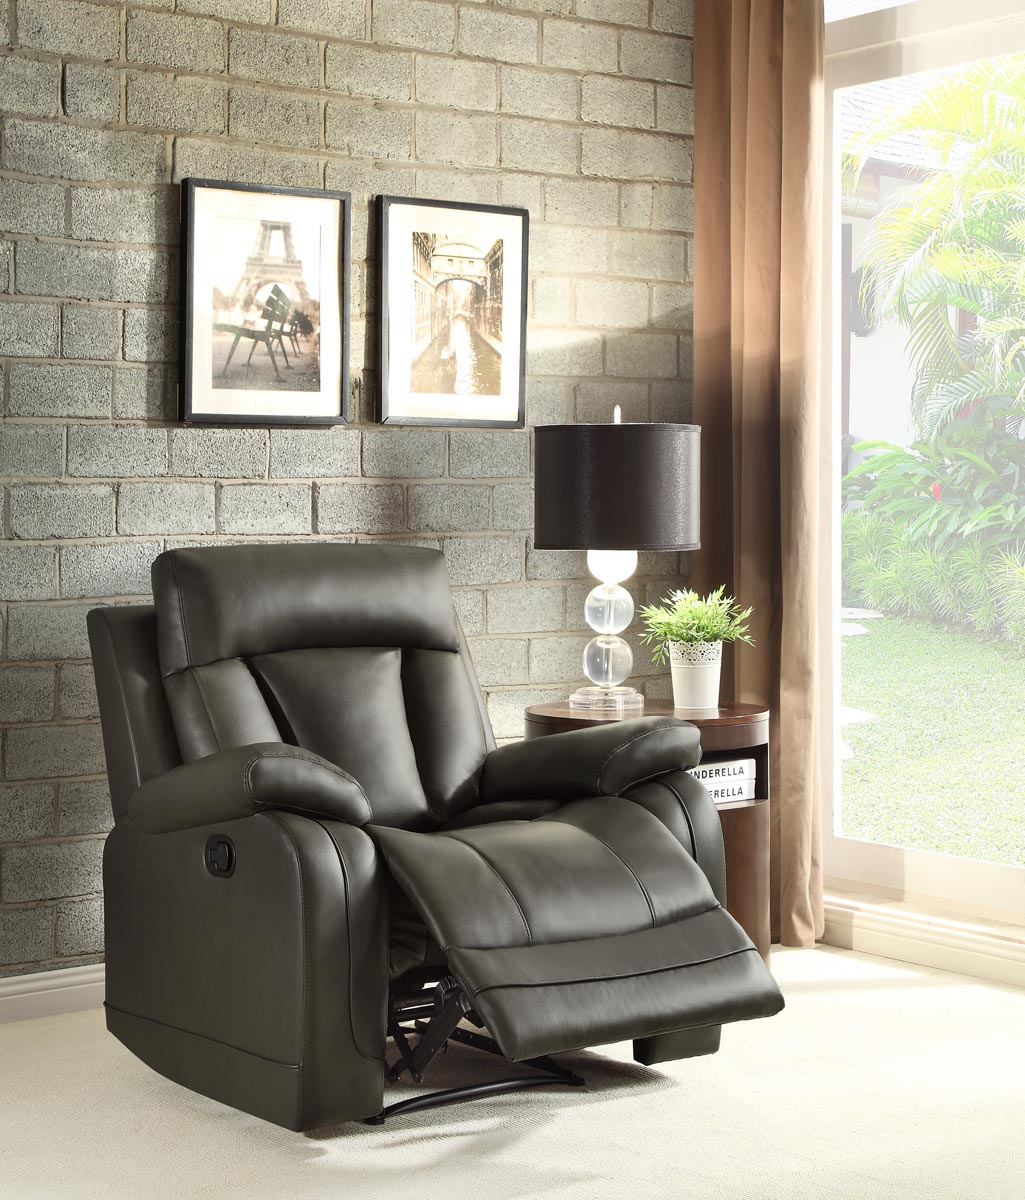 Homelegance Ackerman Reclining Chair - Grey Bonded Leather Match